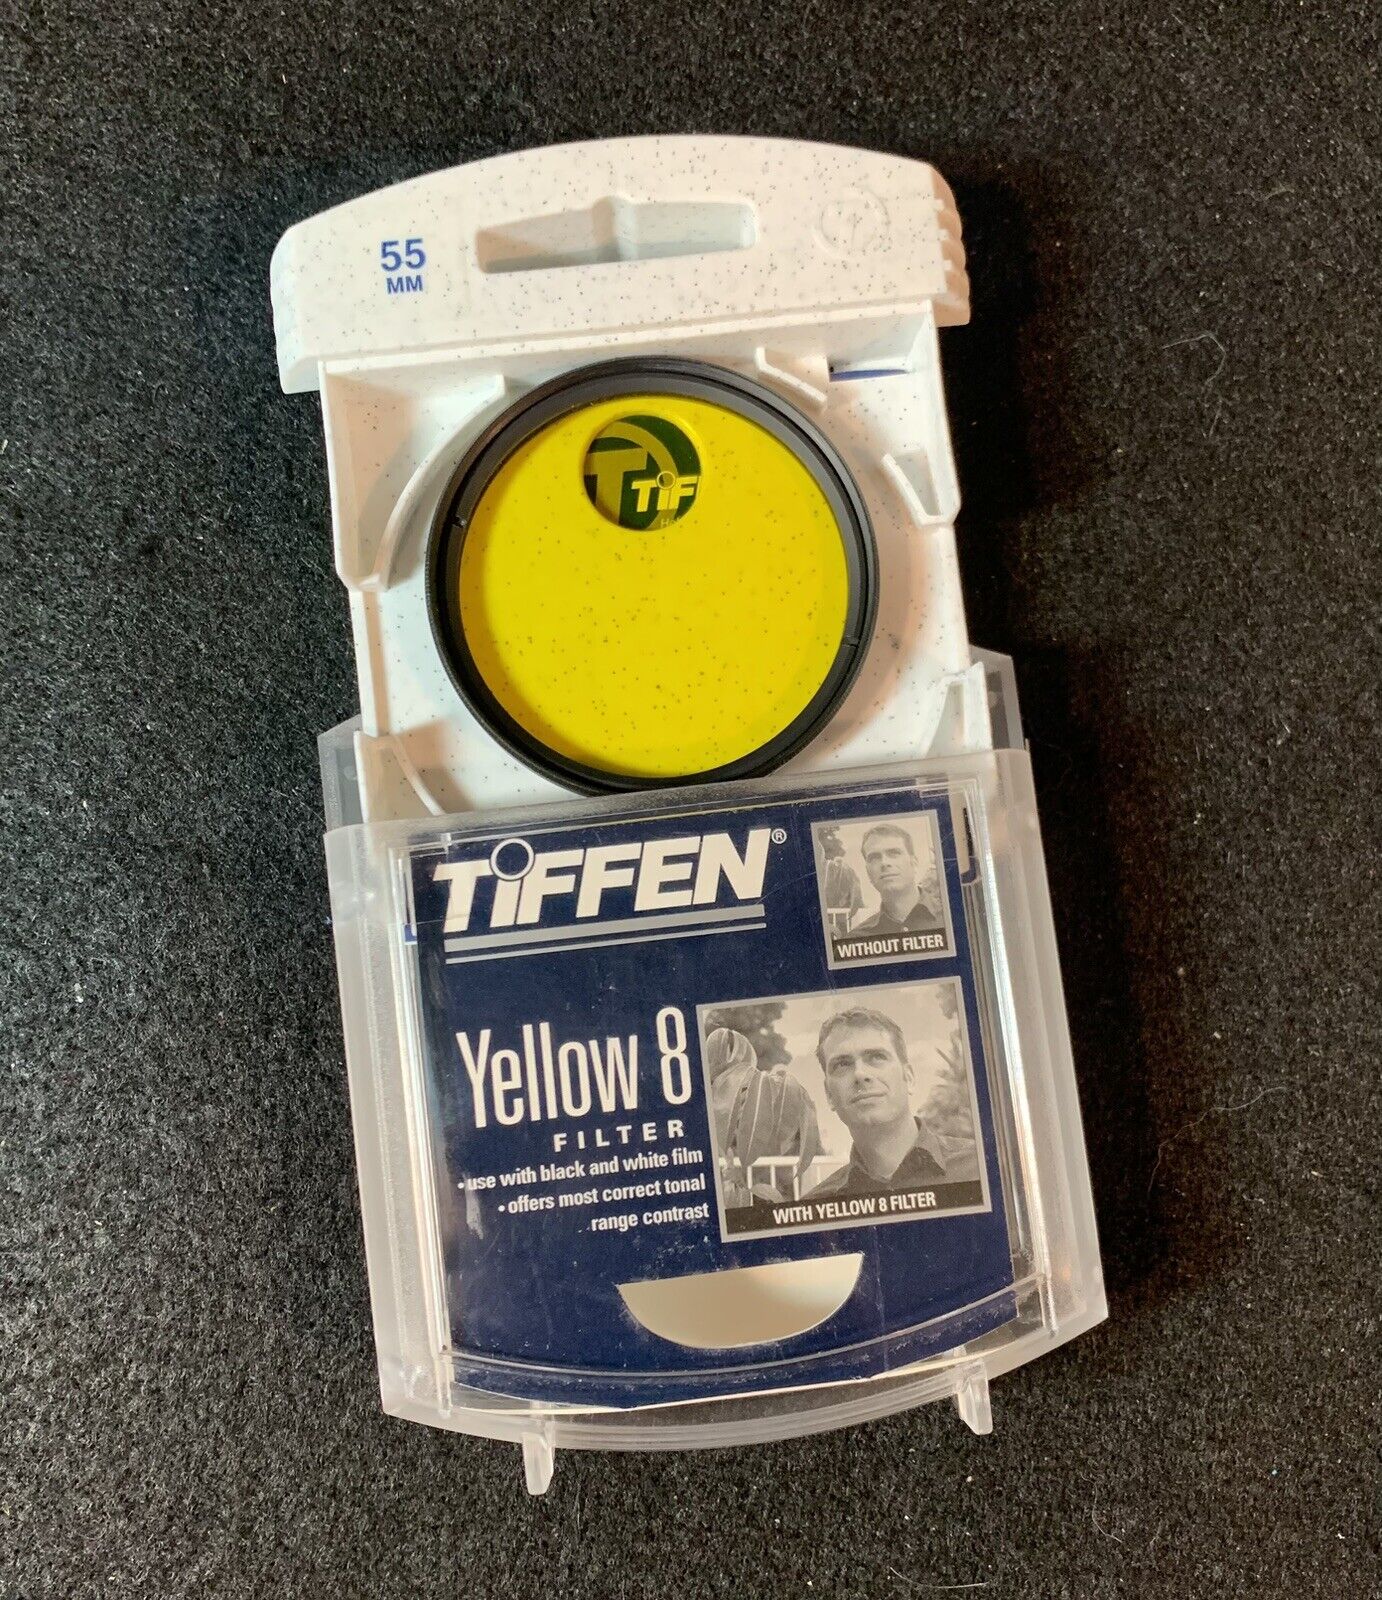 Tiffen (genuine) 55 mm Yellow 8 Screw-In Filter with case